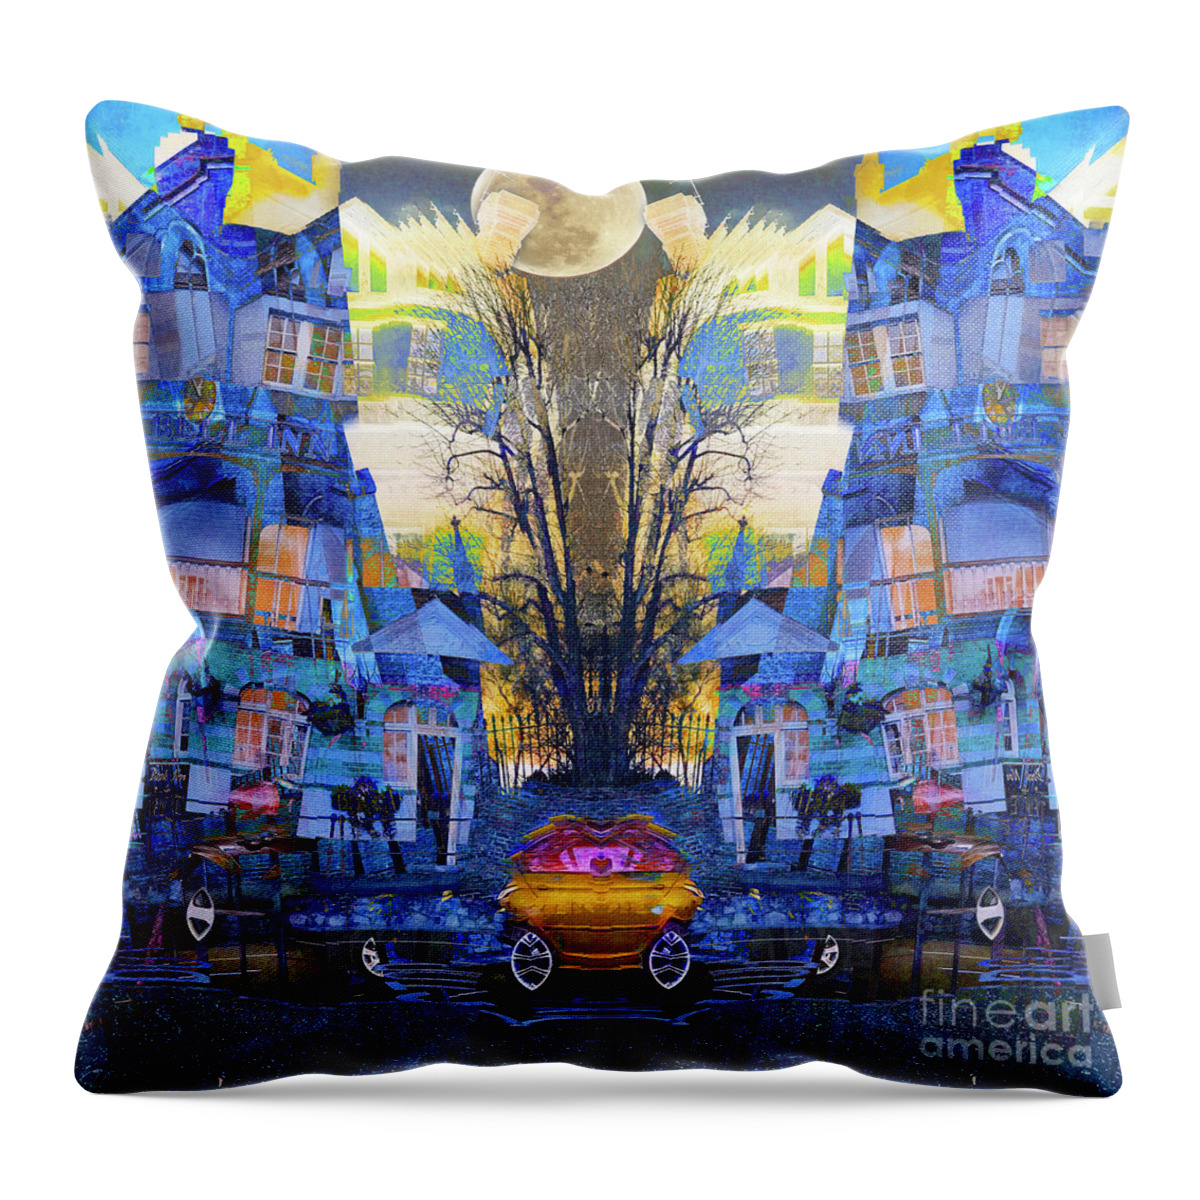 Pano-sabotage Throw Pillow featuring the photograph Cinderella's Coach by LemonArt Photography